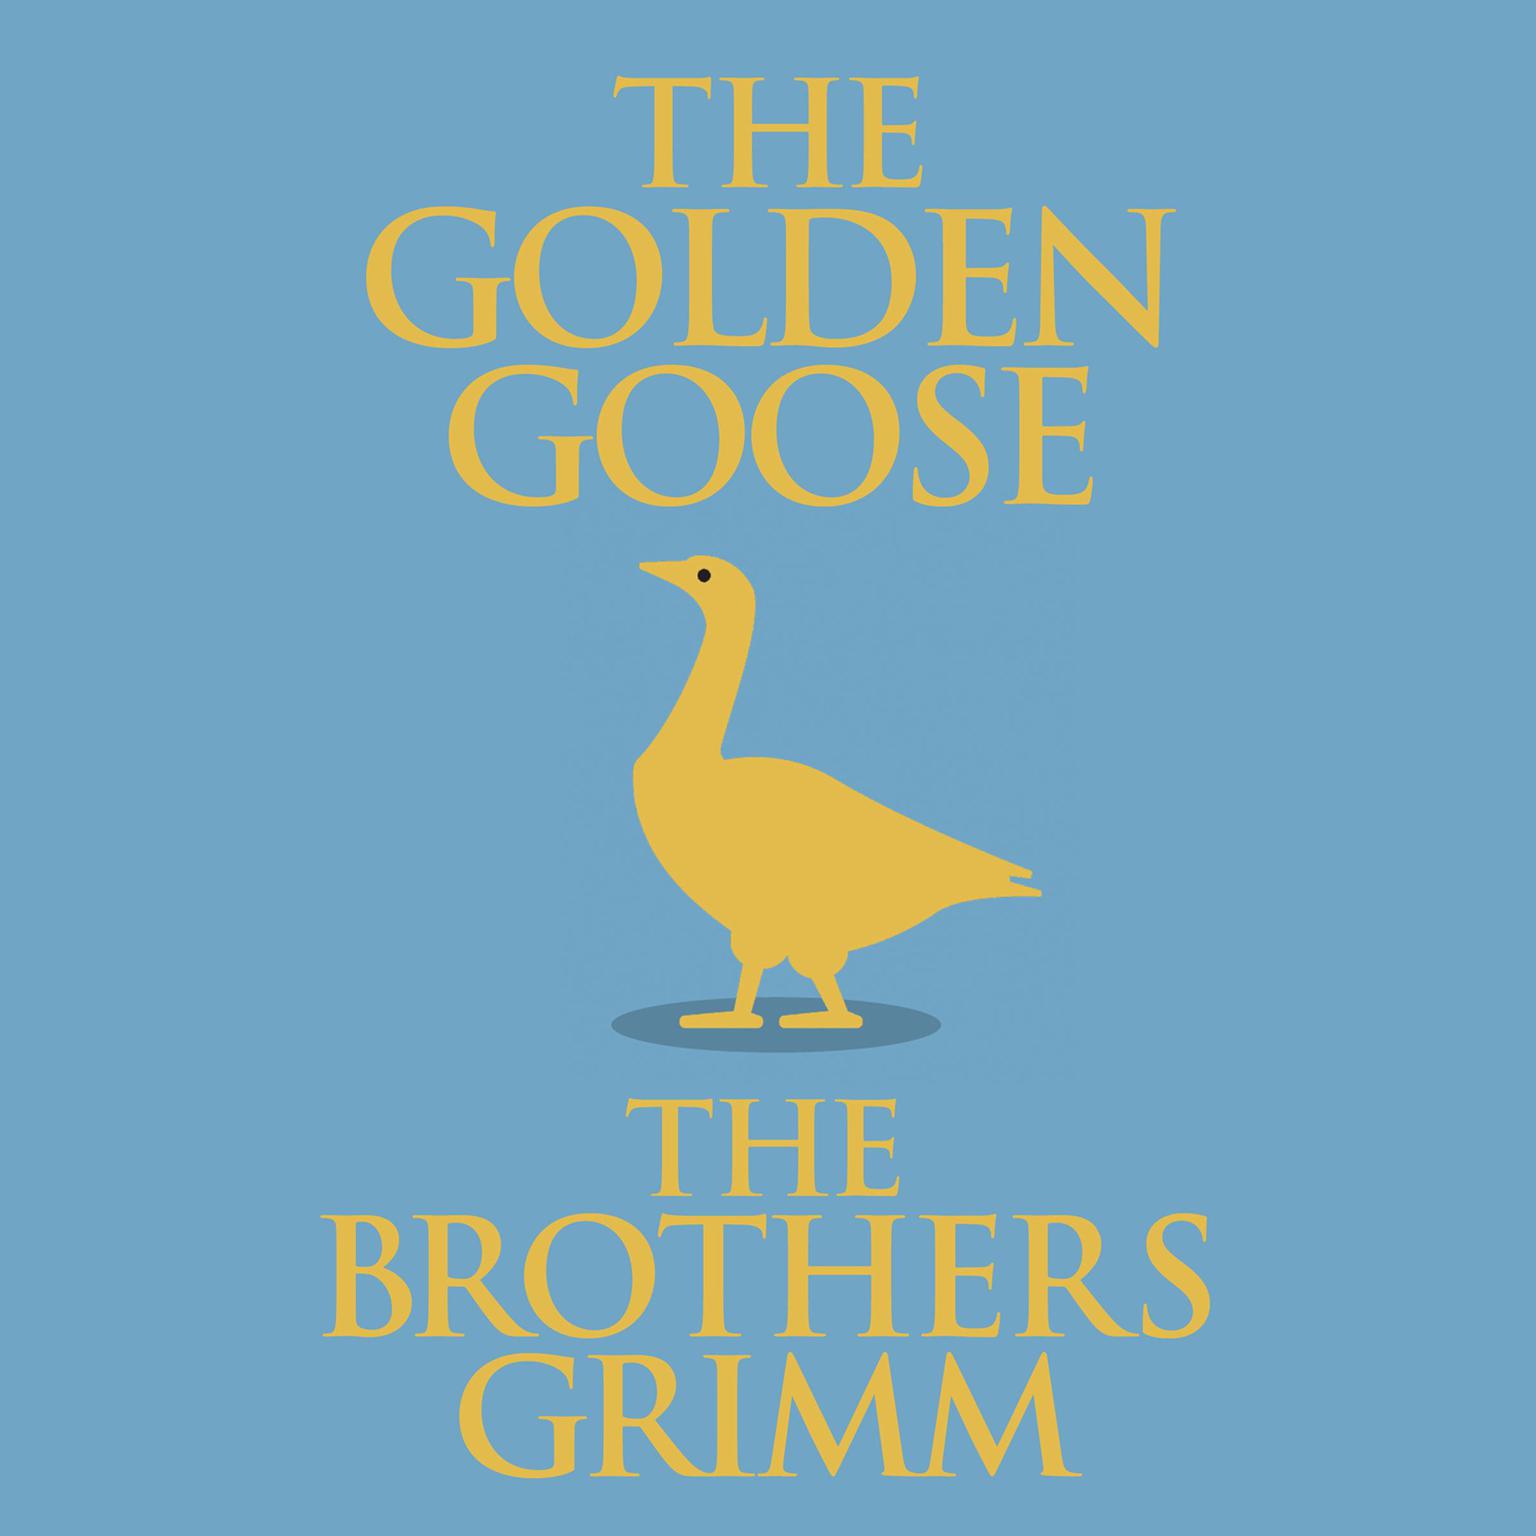 The Golden Goose Audiobook, by The Brothers Grimm